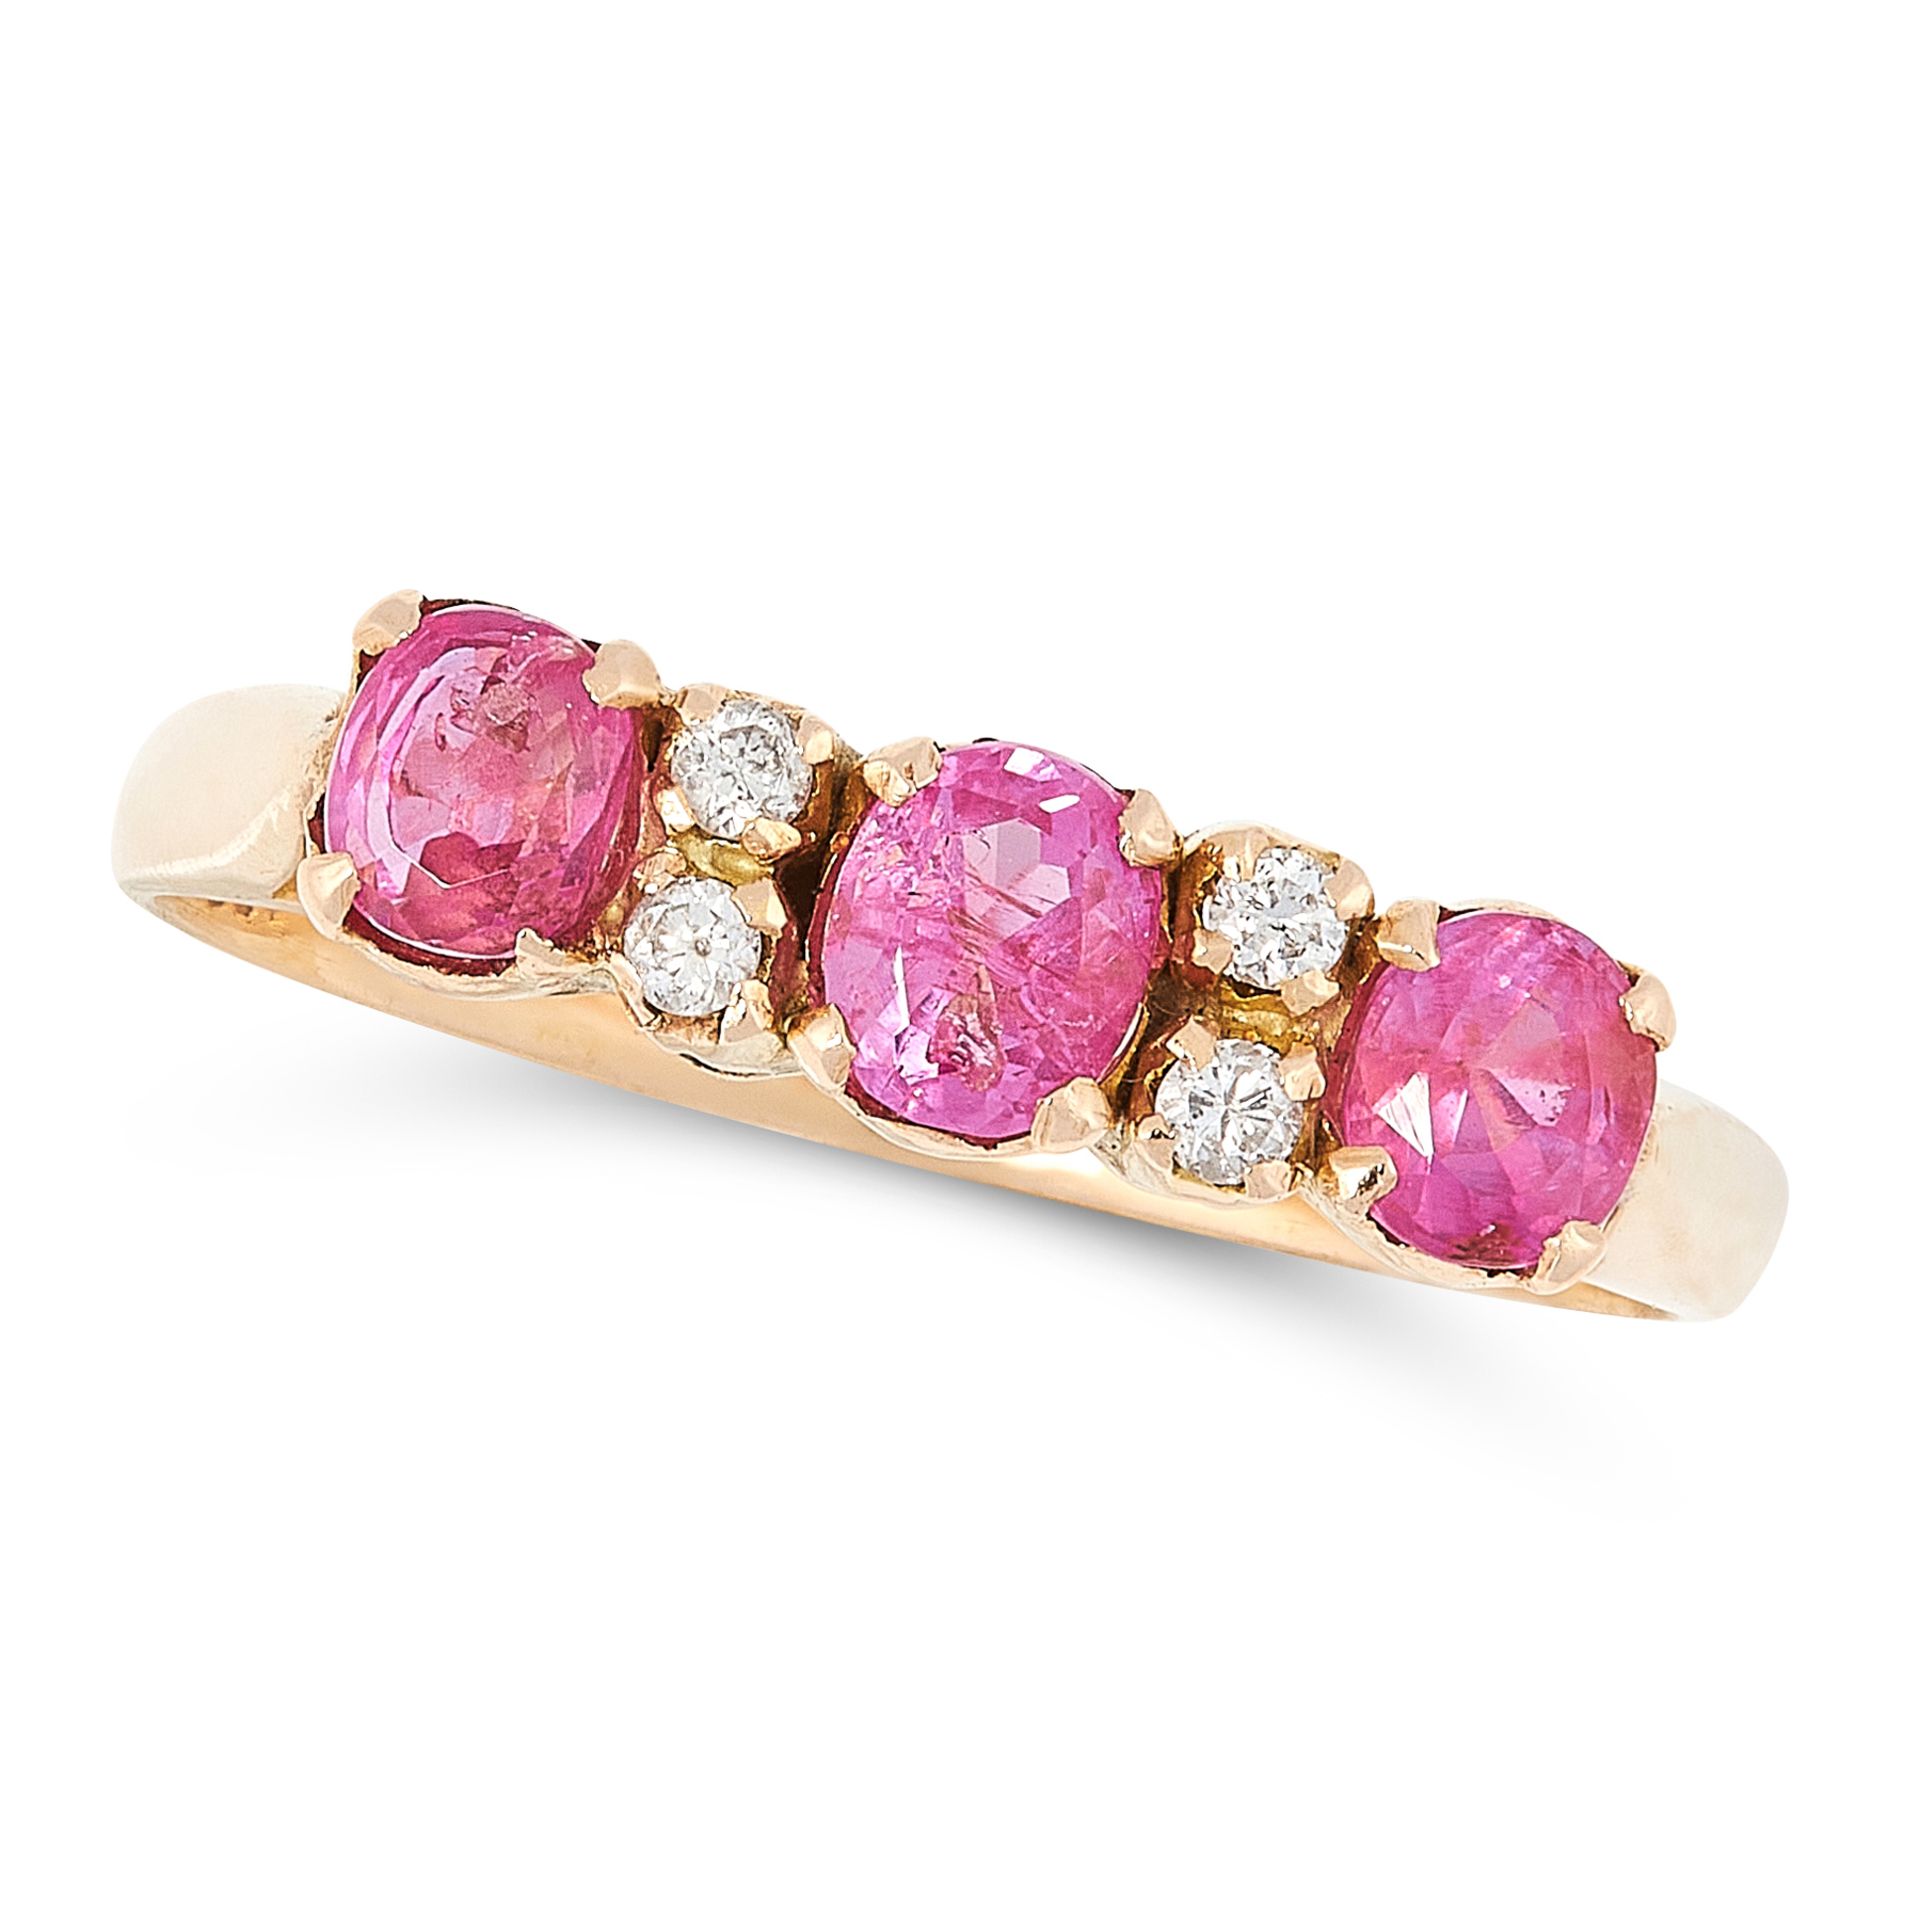 A PINK SAPPHIRE AND DIAMOND RING in 18ct yellow gold, set with a trio of graduated oval cut pink